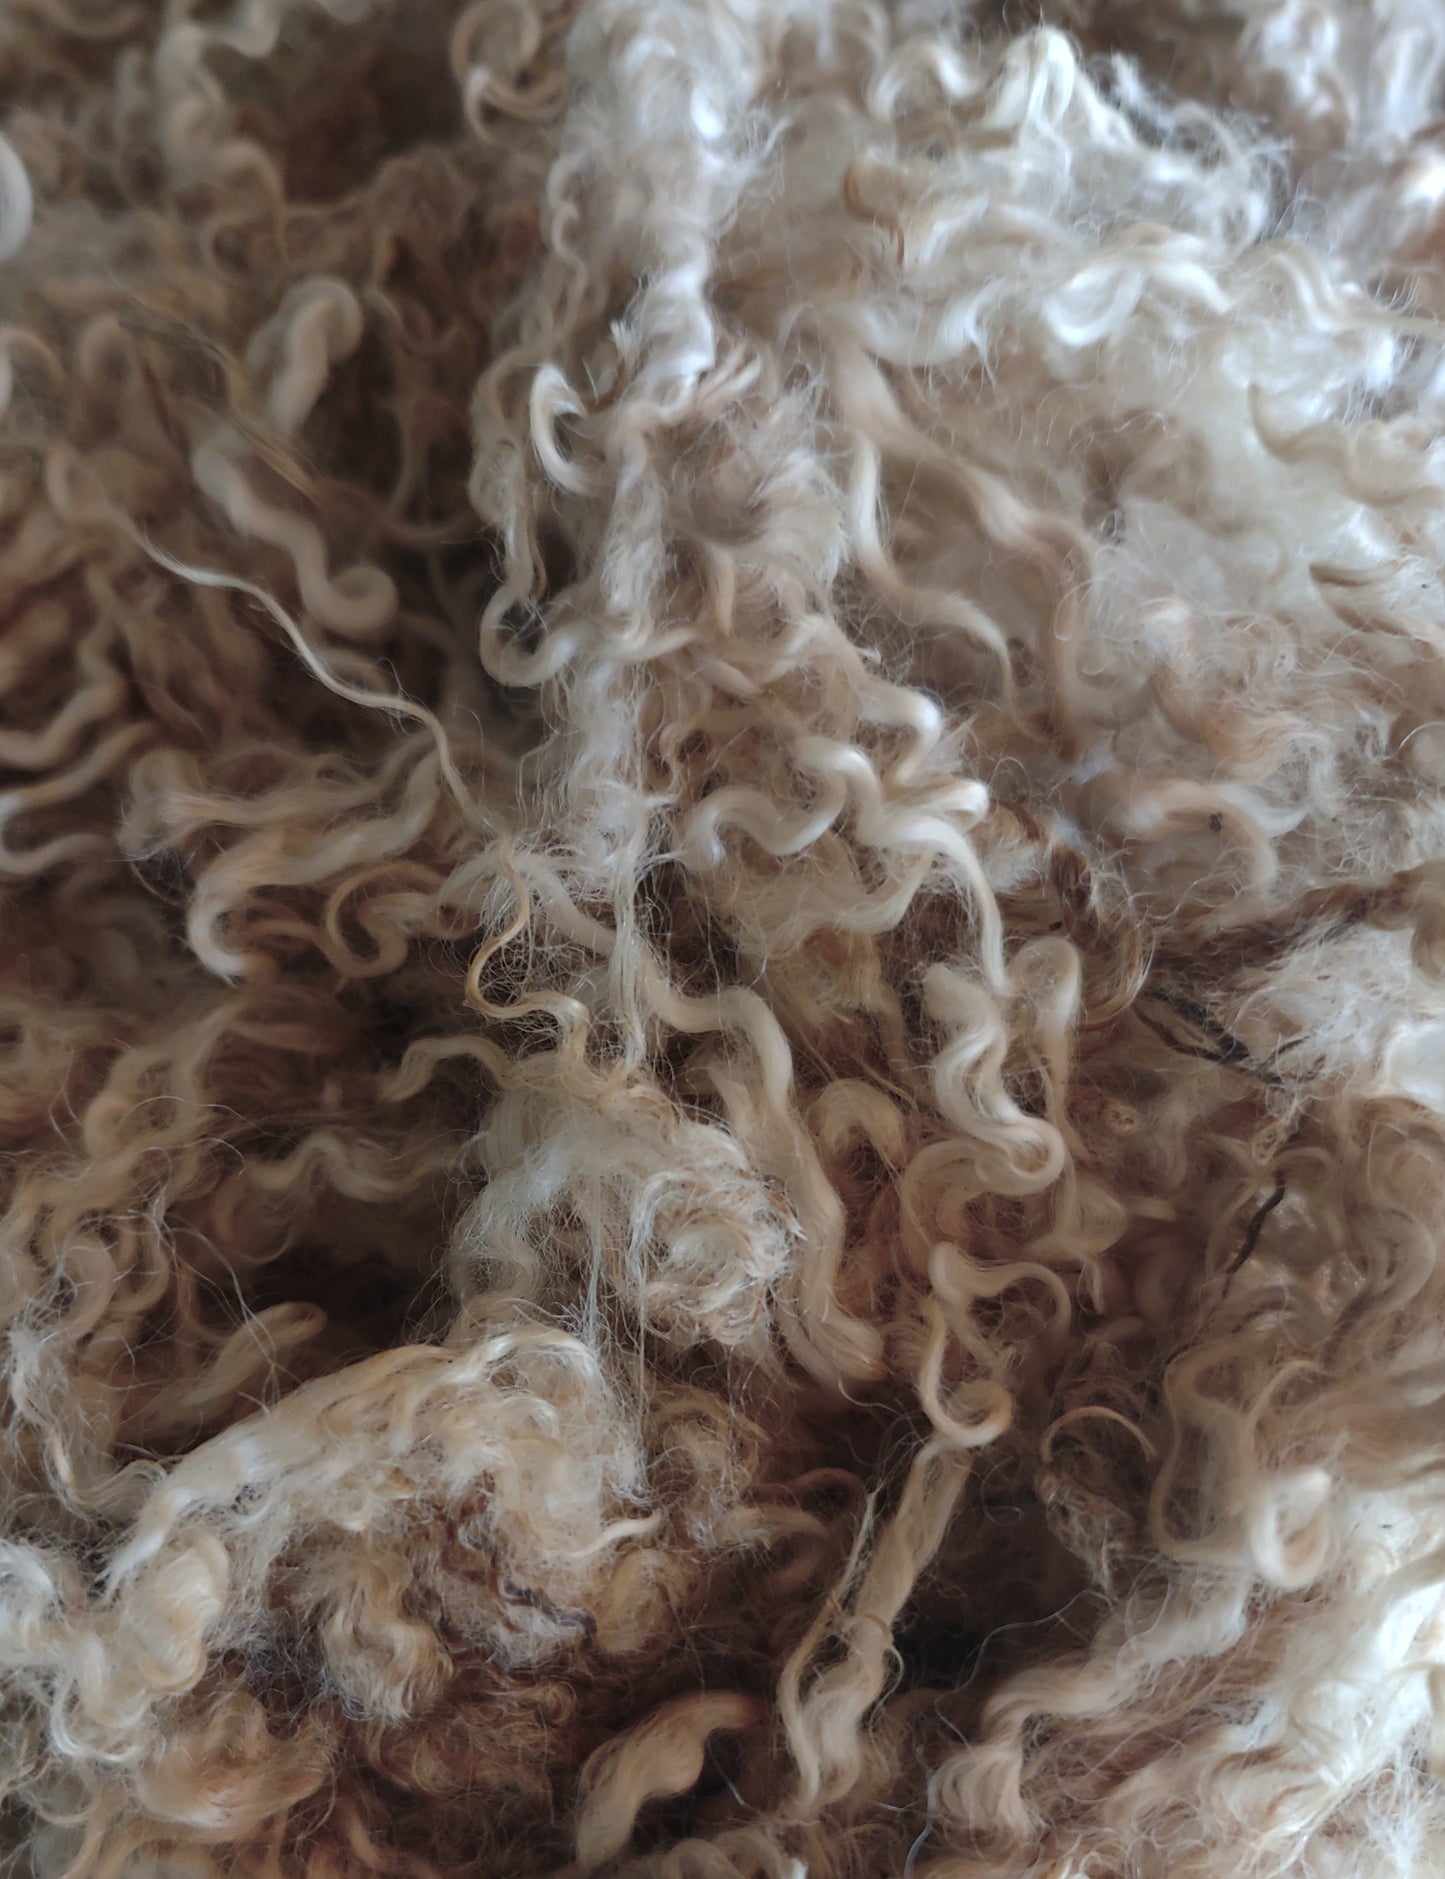 Gorgeous wensyledale prime locks fabulous for dyeing felting spinning young ewes raw per lb